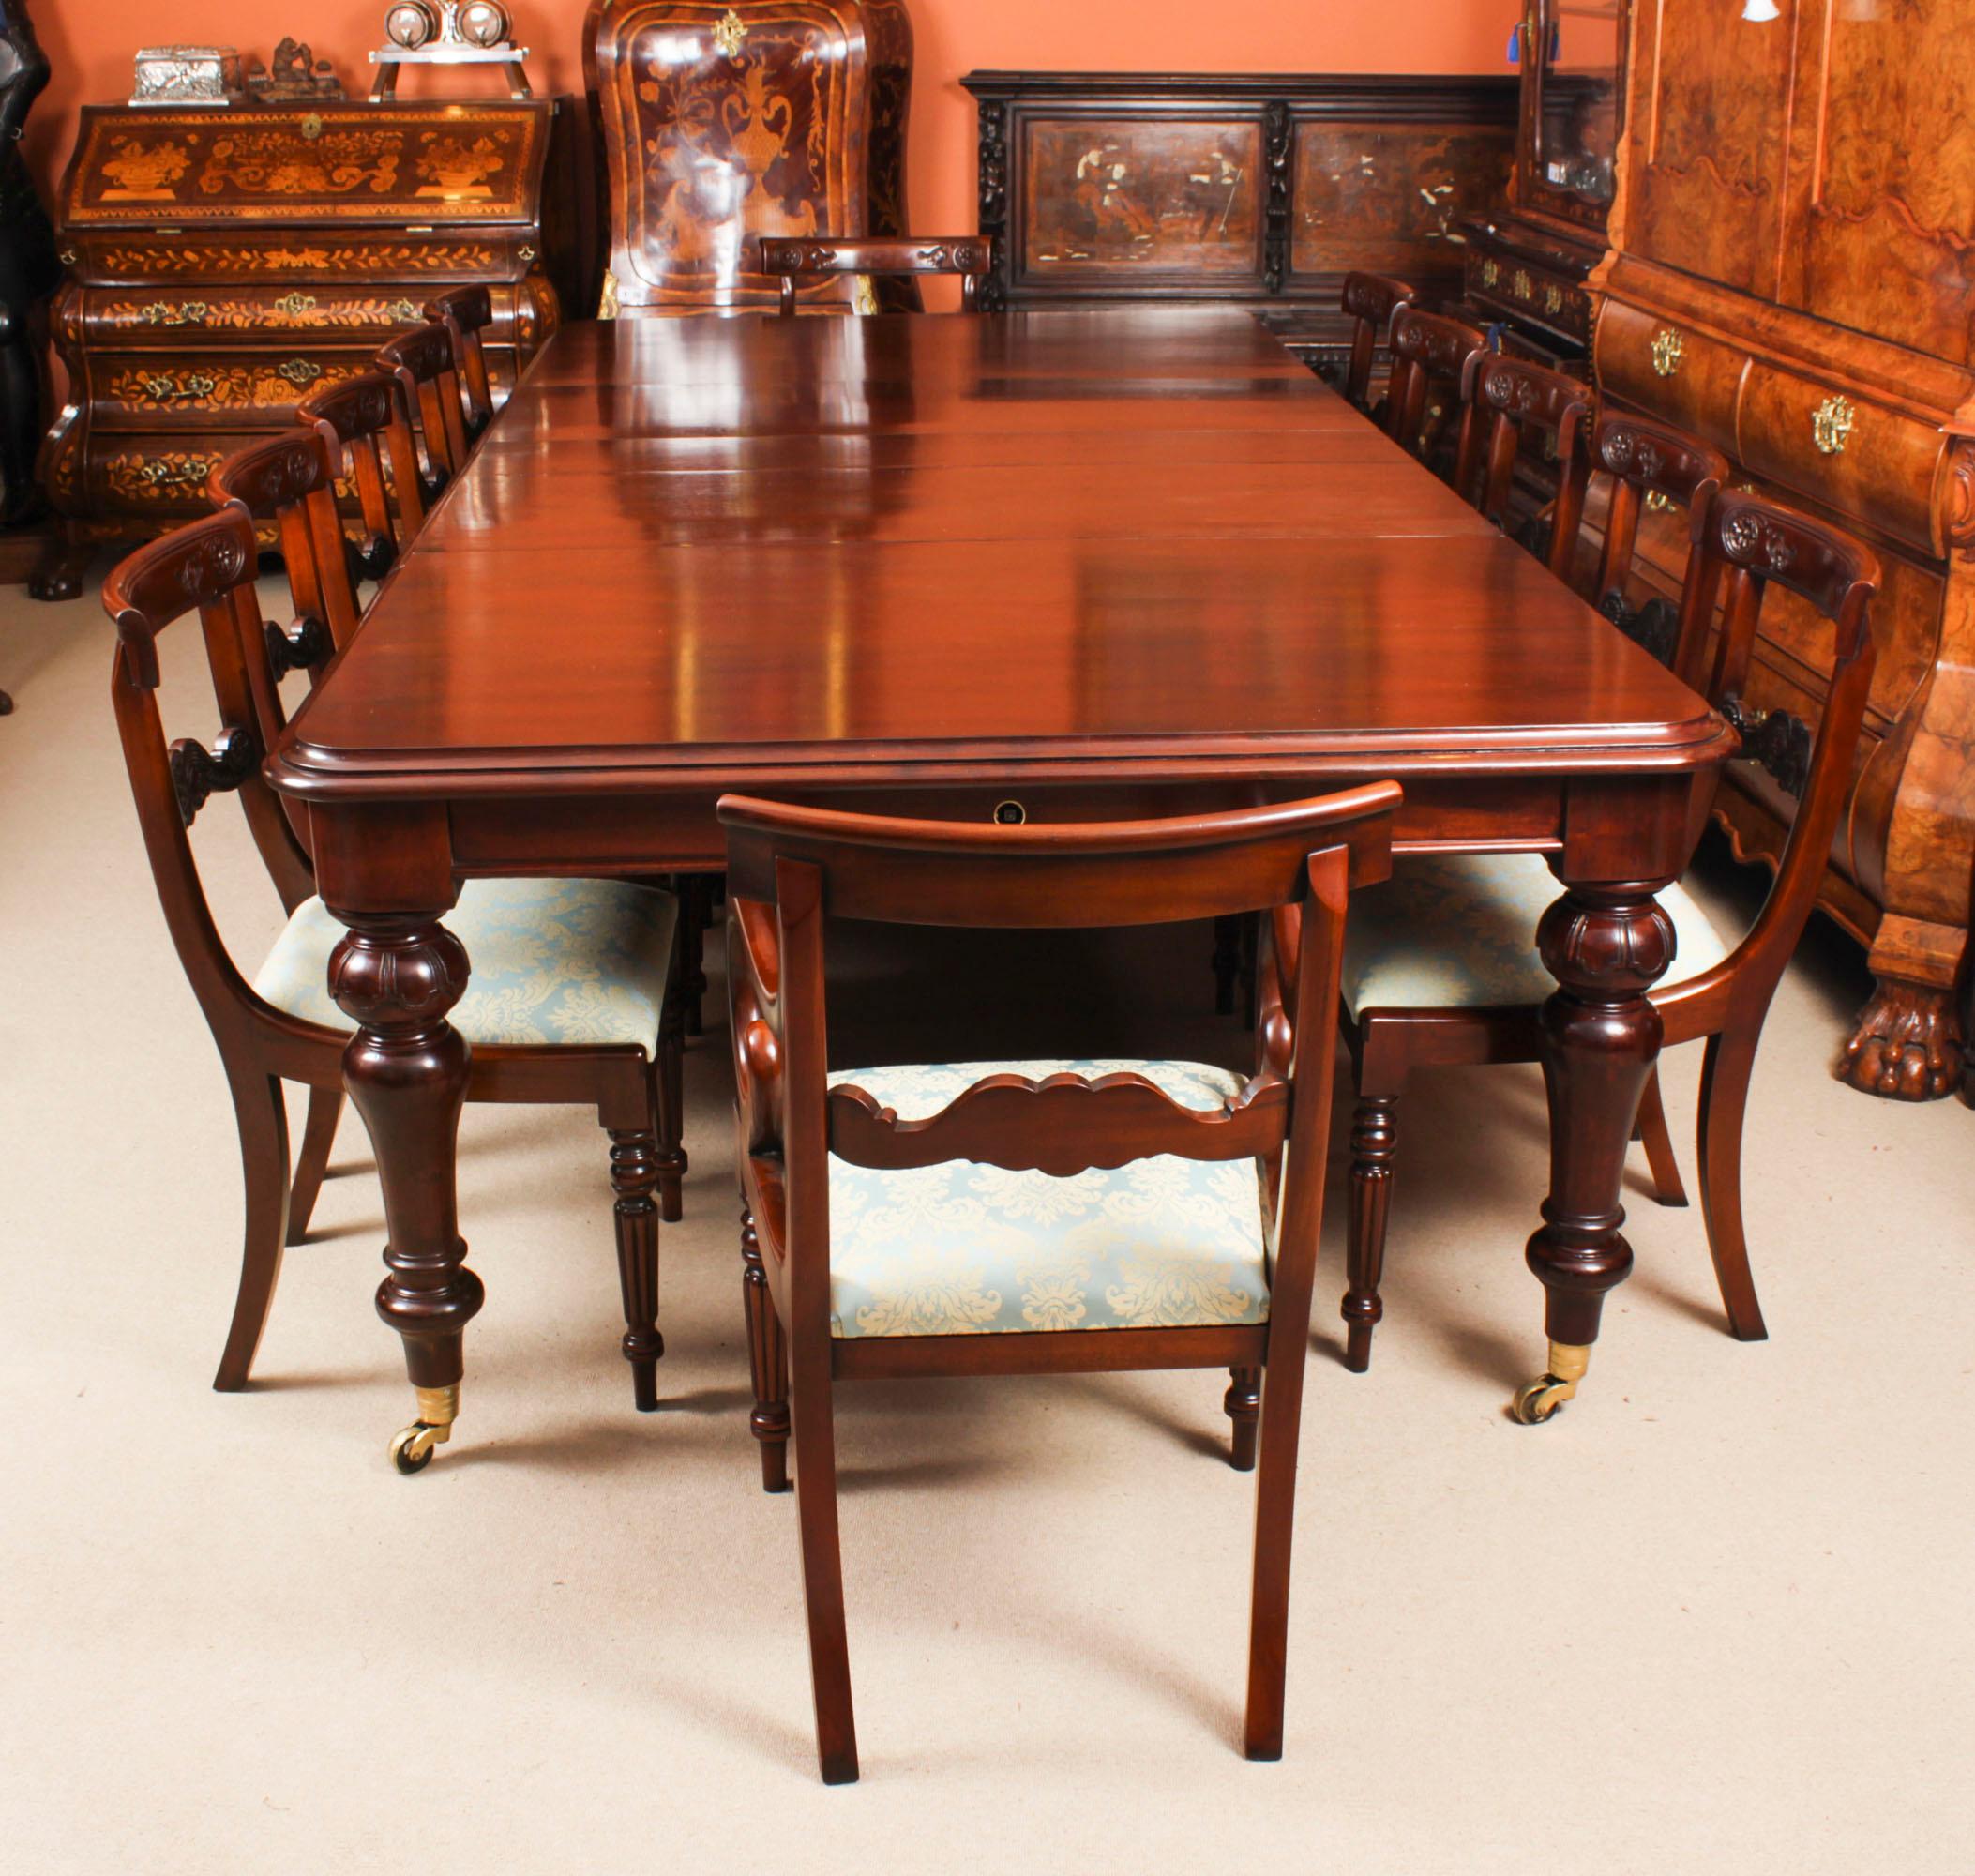 This is a fantastic  dining set comprising of an antique William IV dining table, C1835 in date,  with a set of ten bar back  dining chairs, dating from the late  20th century. 

The magnificent antique William IV solid mahogany dining table can can